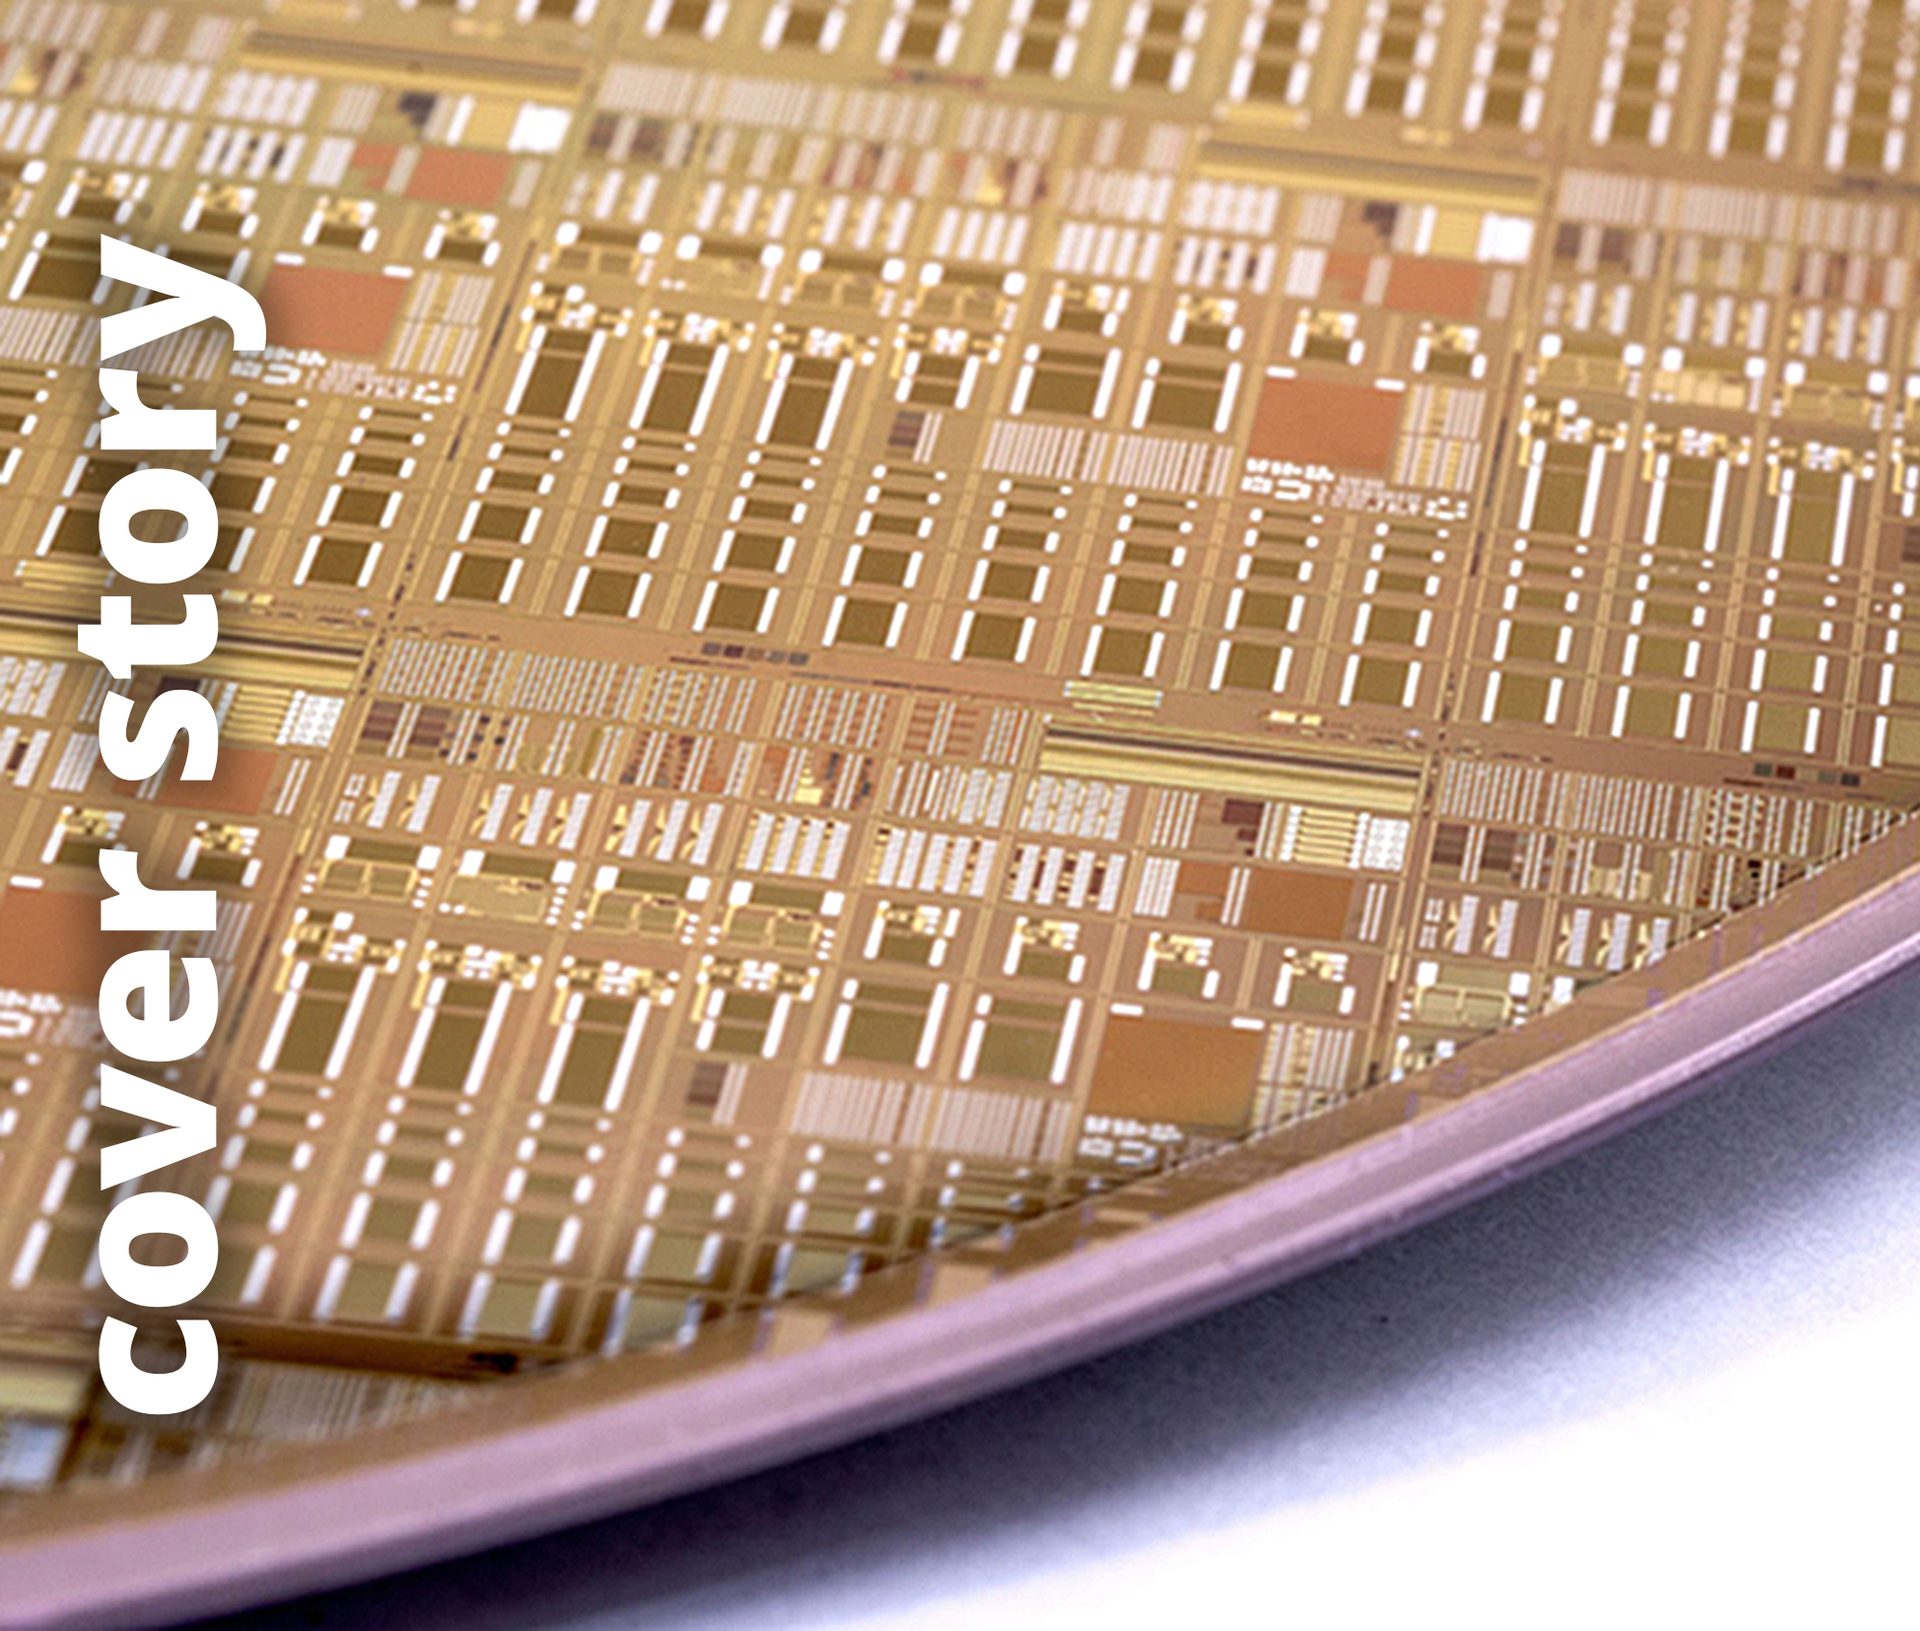 Cover Story: 8-inch GaN-on-QST 650V Power IC Device Wafer Zoom-In Image